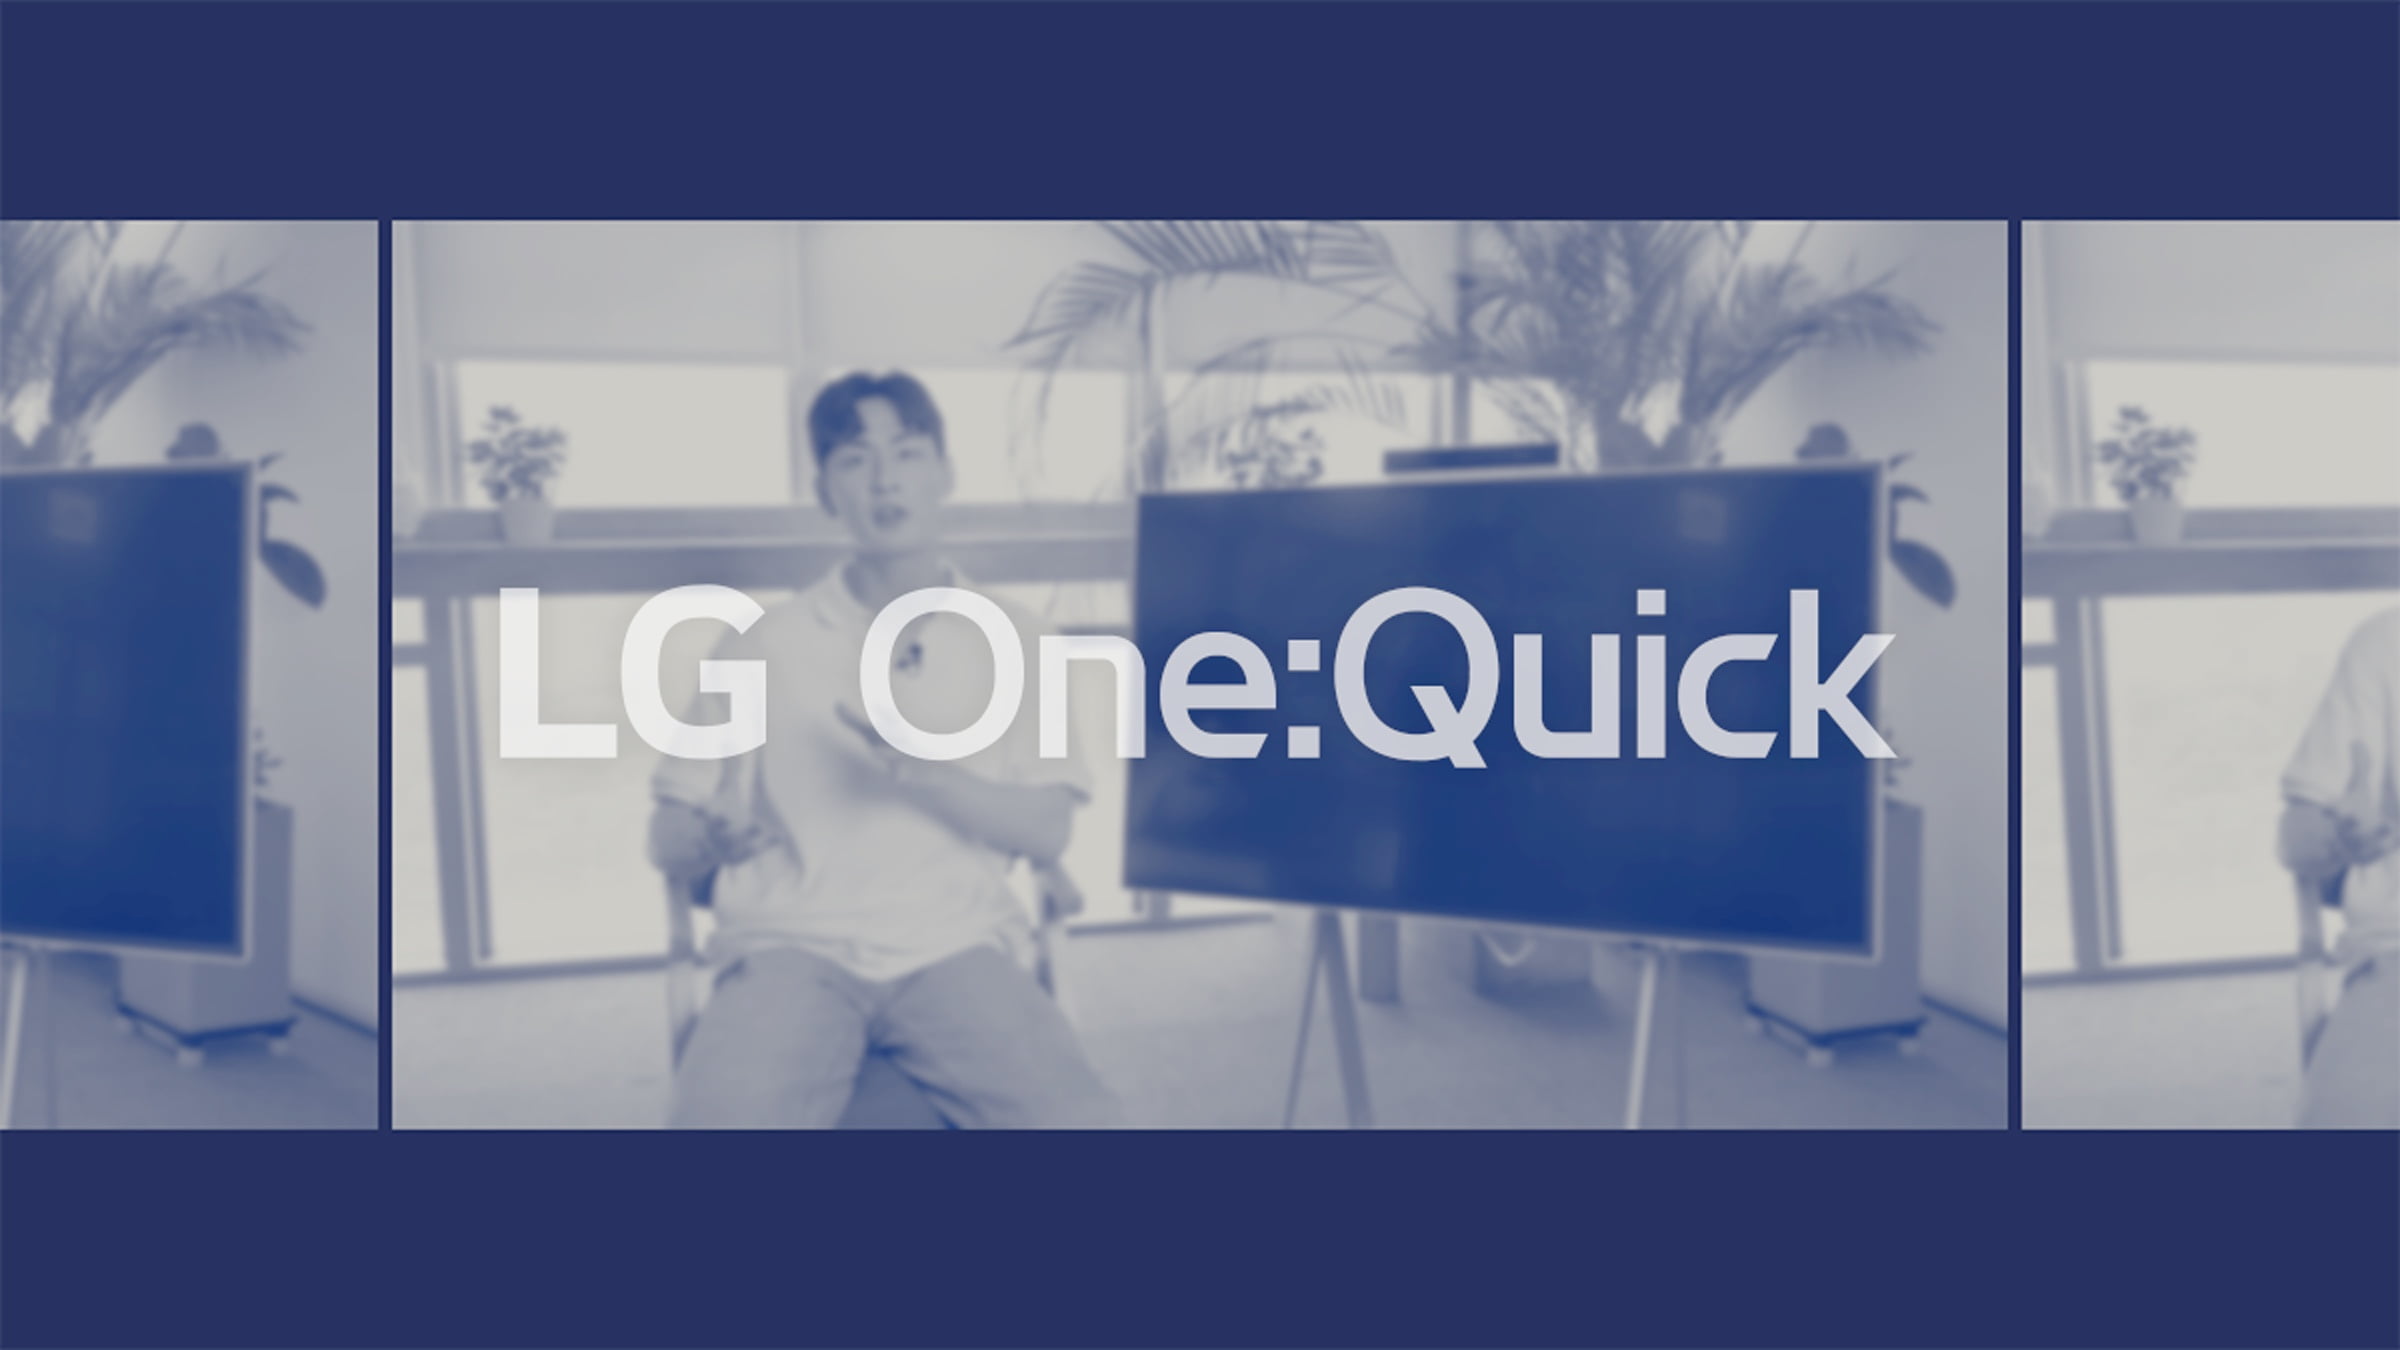 LG onequick remotemeeting review video